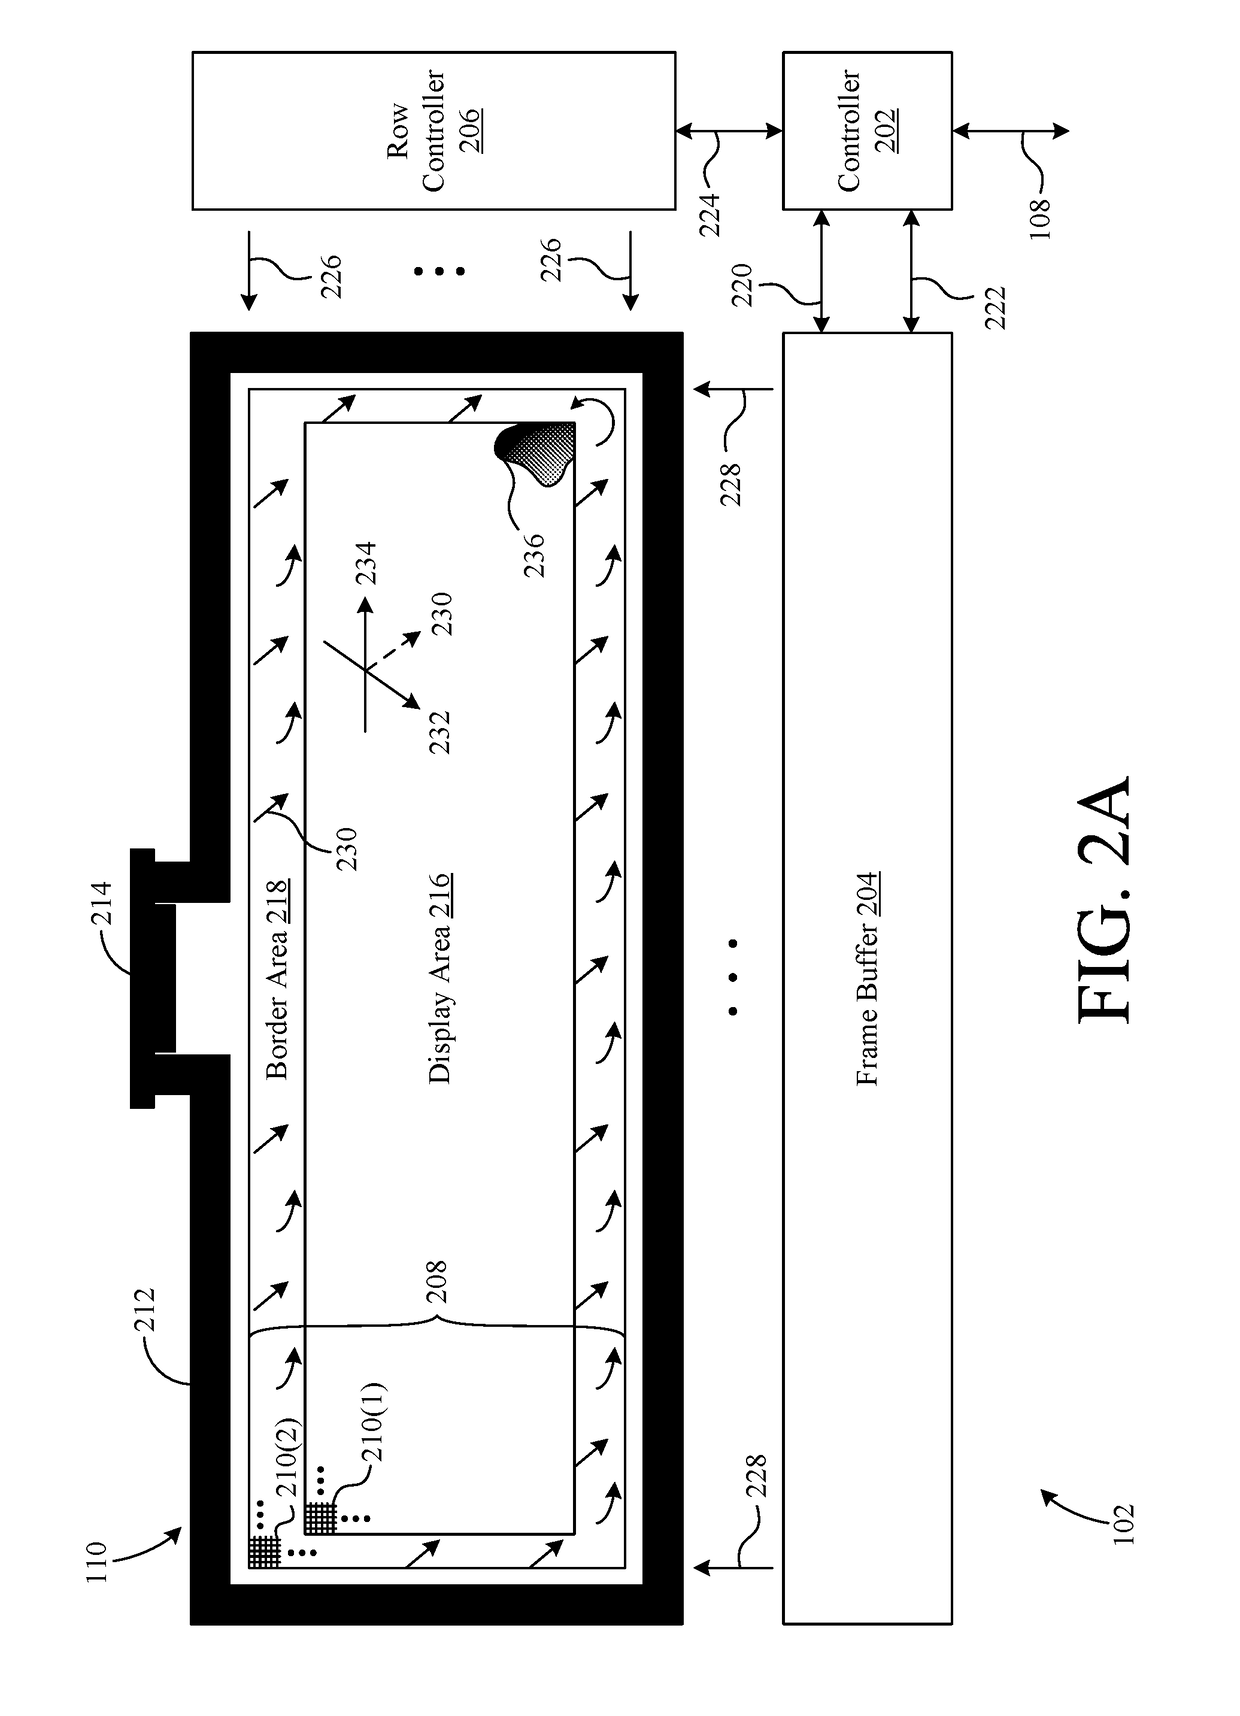 System and Method for Protecting a Liquid Crystal Display by Controlling Ion Migration